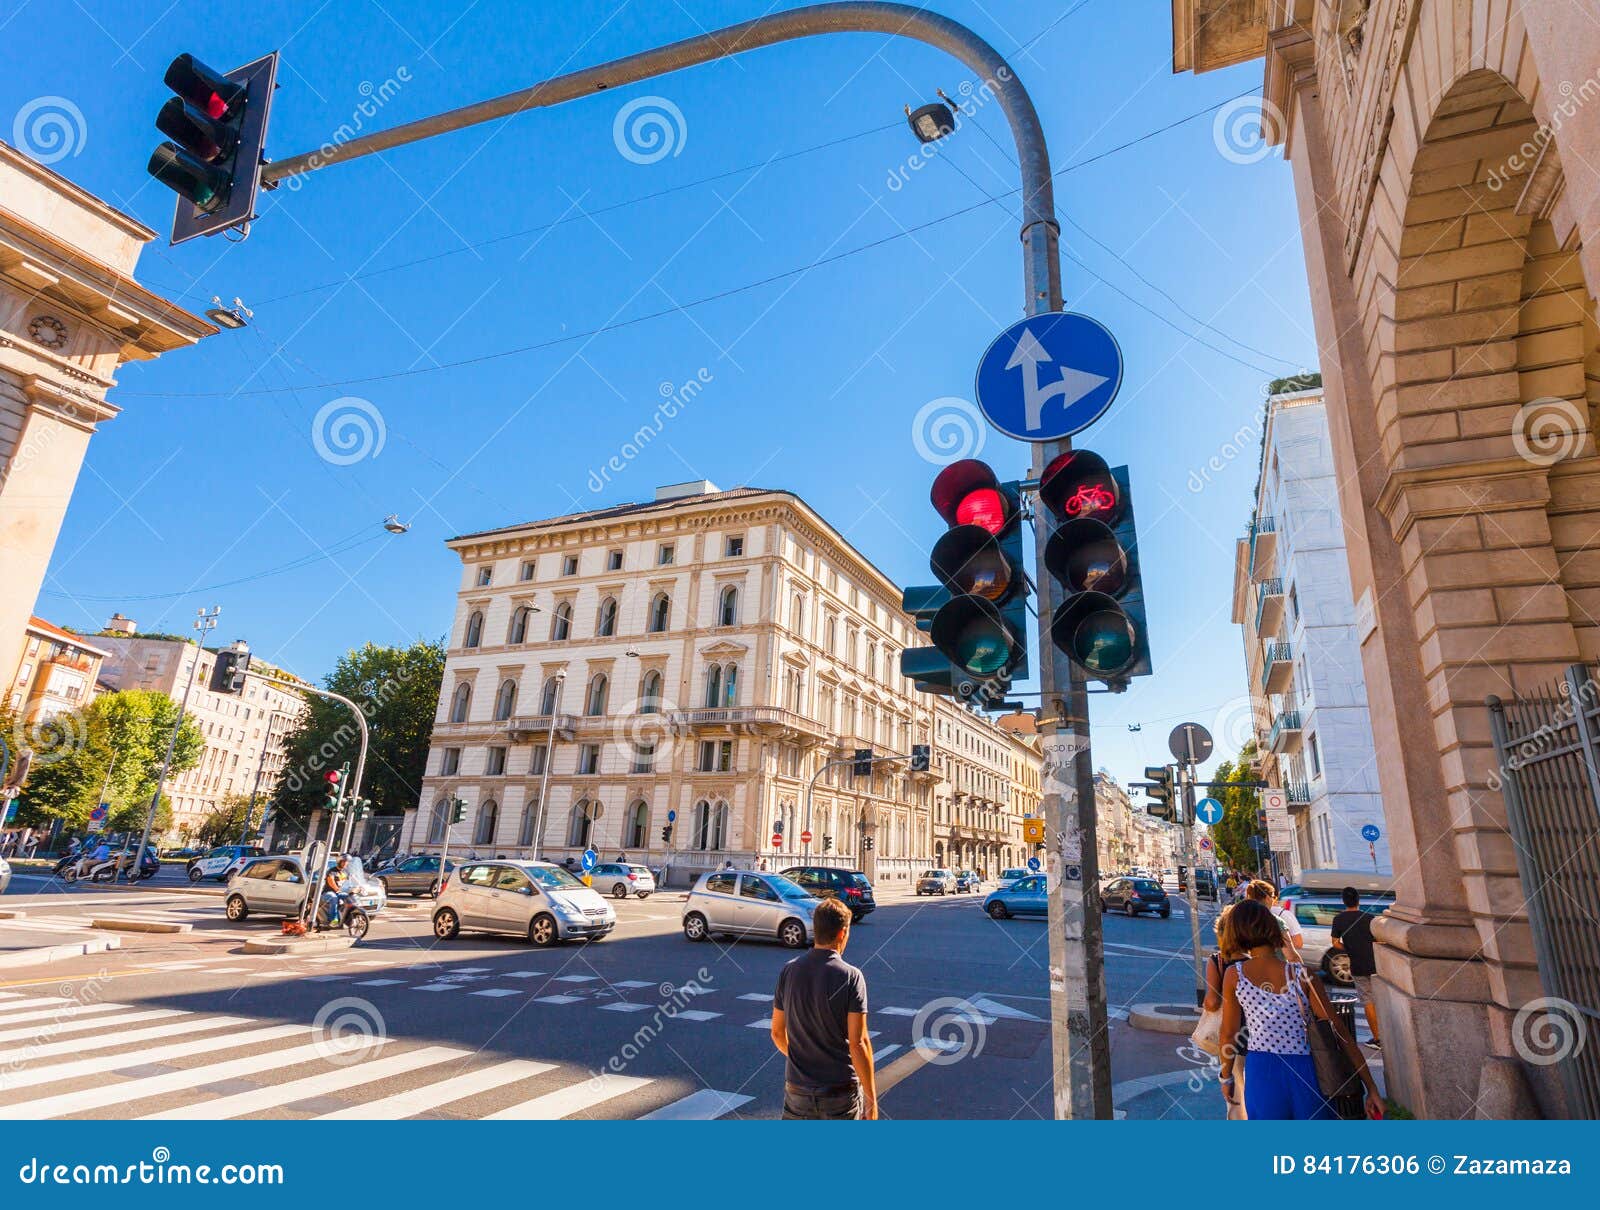 MILAN, ITALY - September 06, 2016: Traffic Light Shows the Red Light on the Crossroad on Avenue Buenos Aires Corso Buenos Aires Editorial - Image of people, corso: 84176306